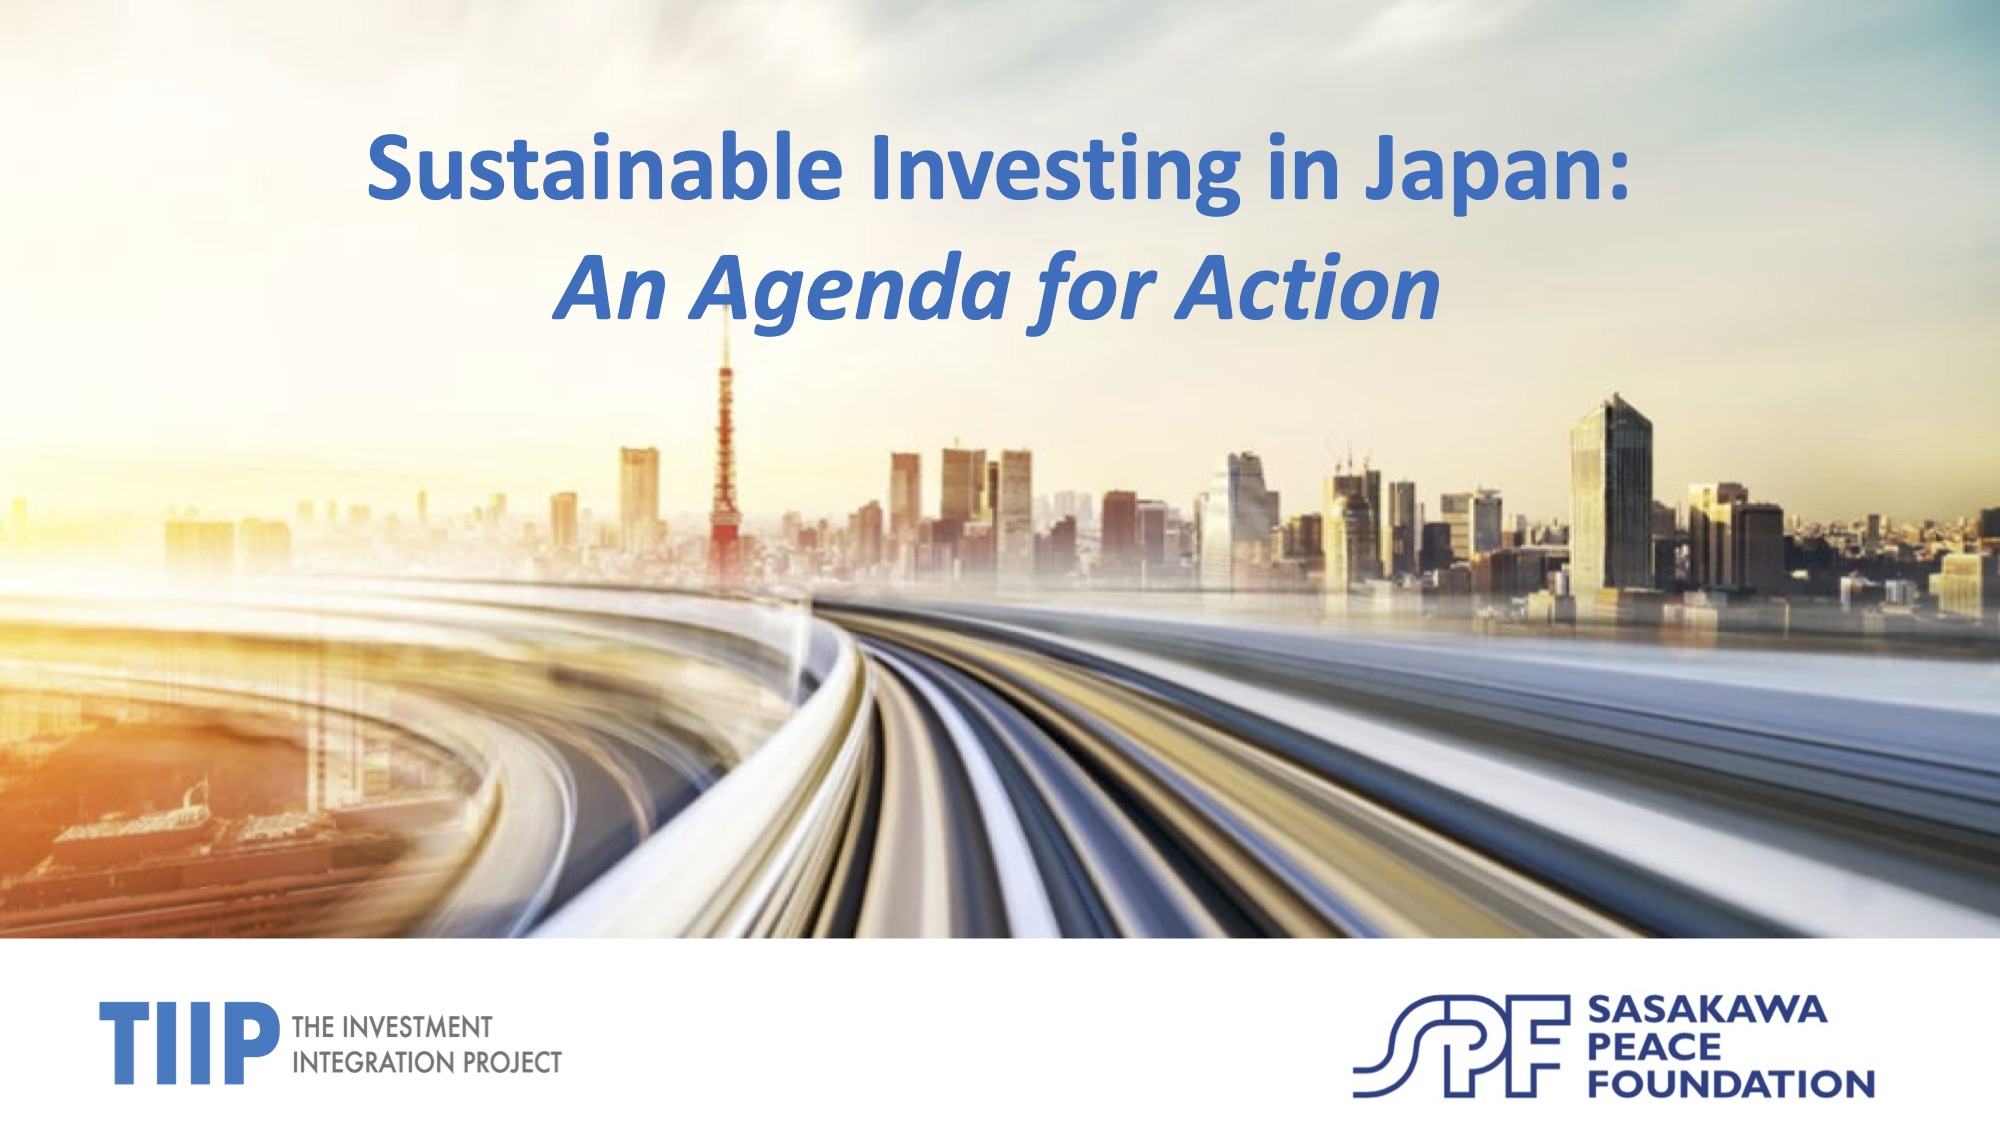 「Sustainable Investing in Japan:An Agenda for Action」（社会的インパクト投資フォーラム プレゼンテーション資料）